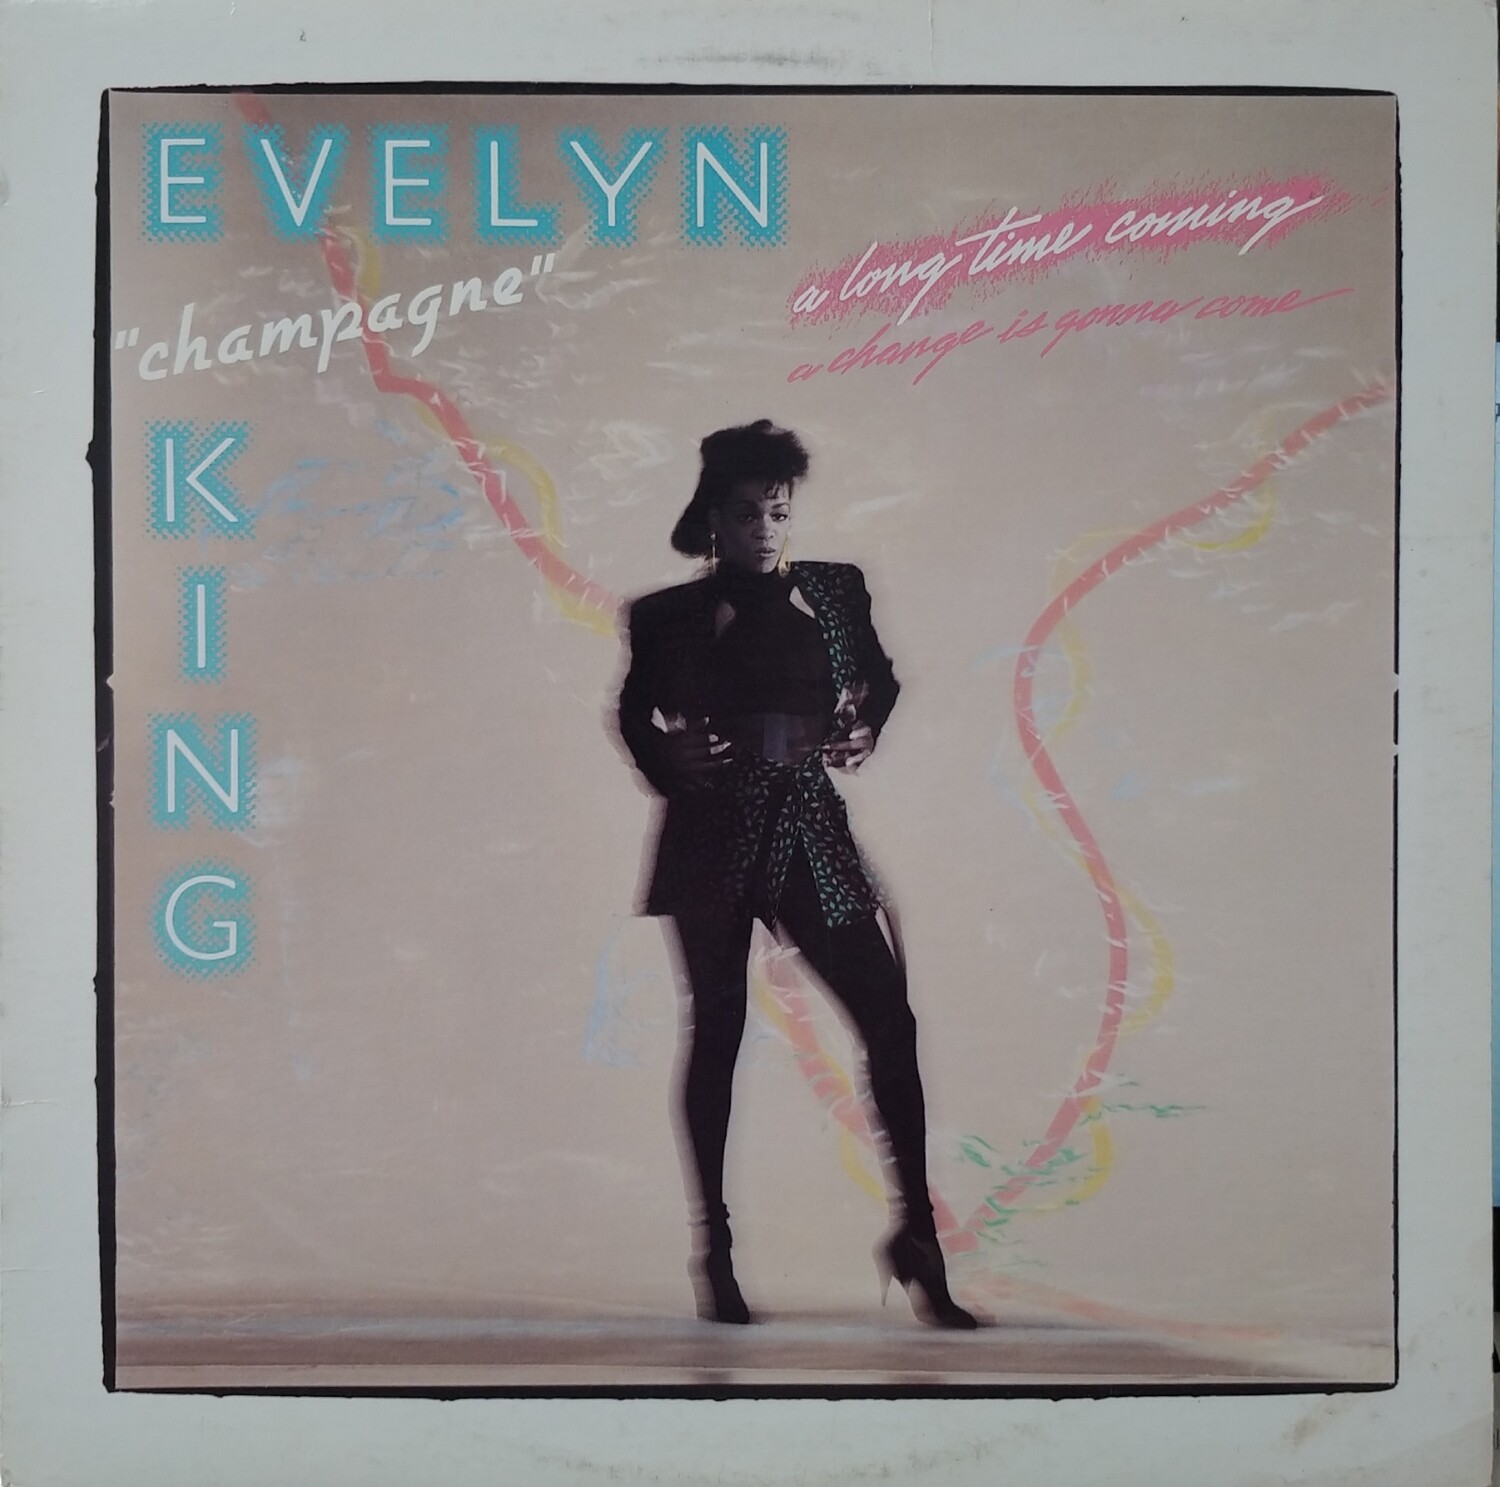 Evelyn Champagne King - A long time coming